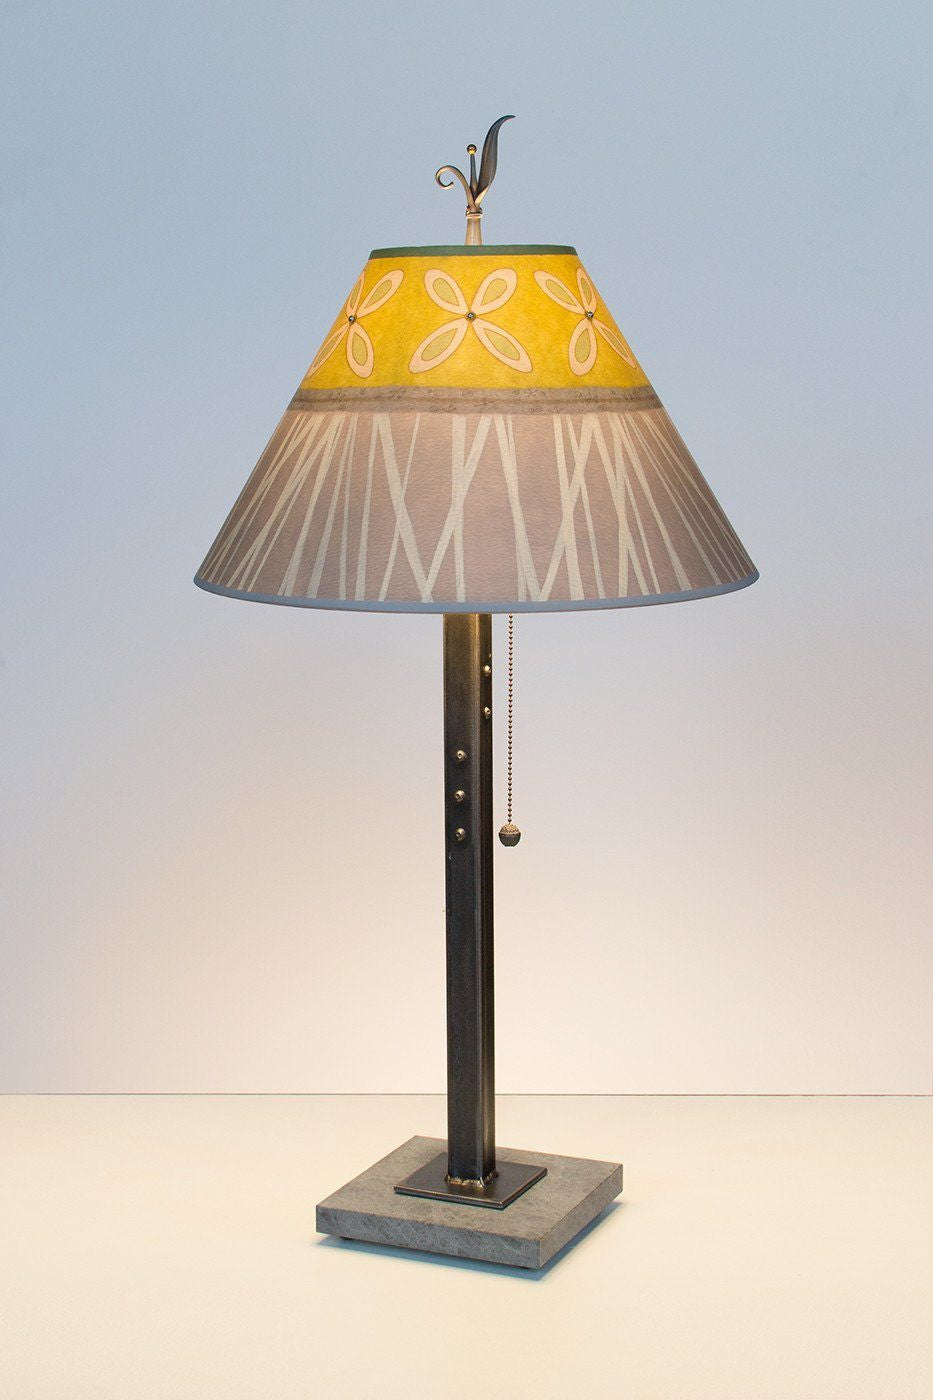 Janna Ugone &amp; Co Table Lamps Steel Table Lamp with Medium Conical Shade in Kiwi